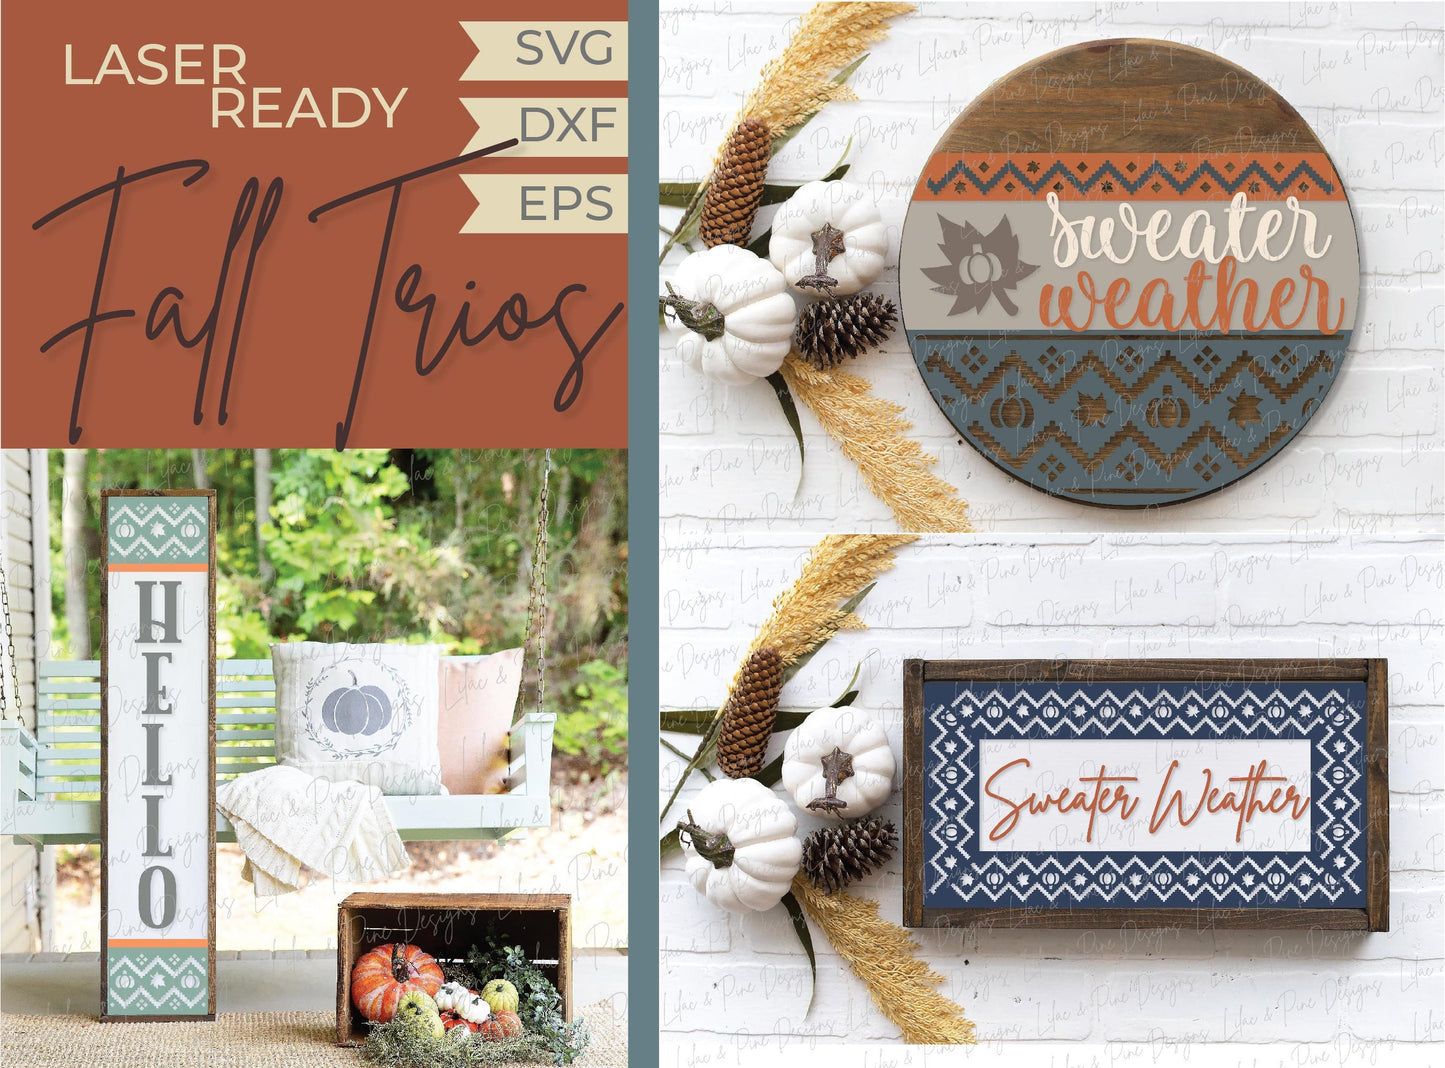 Sweater Weather door hanger SVG, Fall welcome sign, hello fall porch sign svg, autumn porch decor, fall sign bundle, Glowforge laser SVG